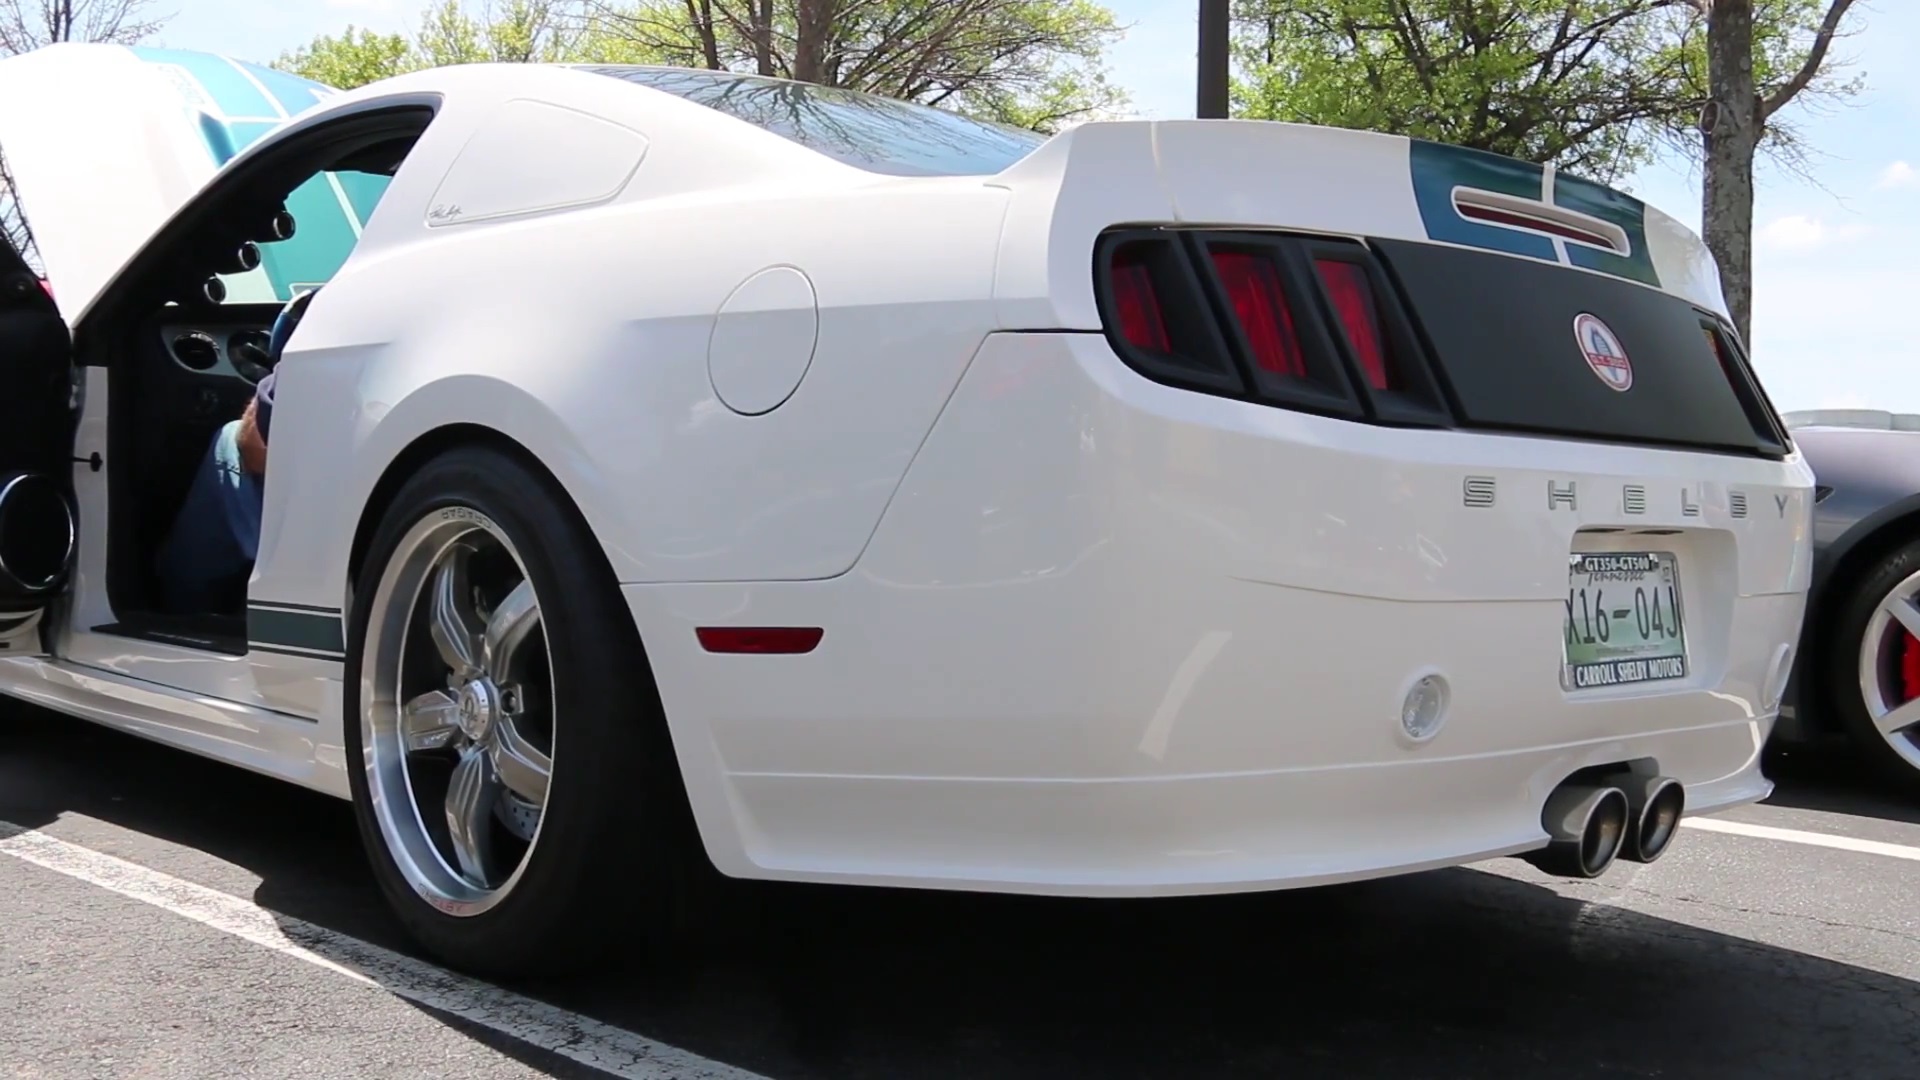 Video: 2011 Ford Mustang Shelby GT350 Exhaust Sound